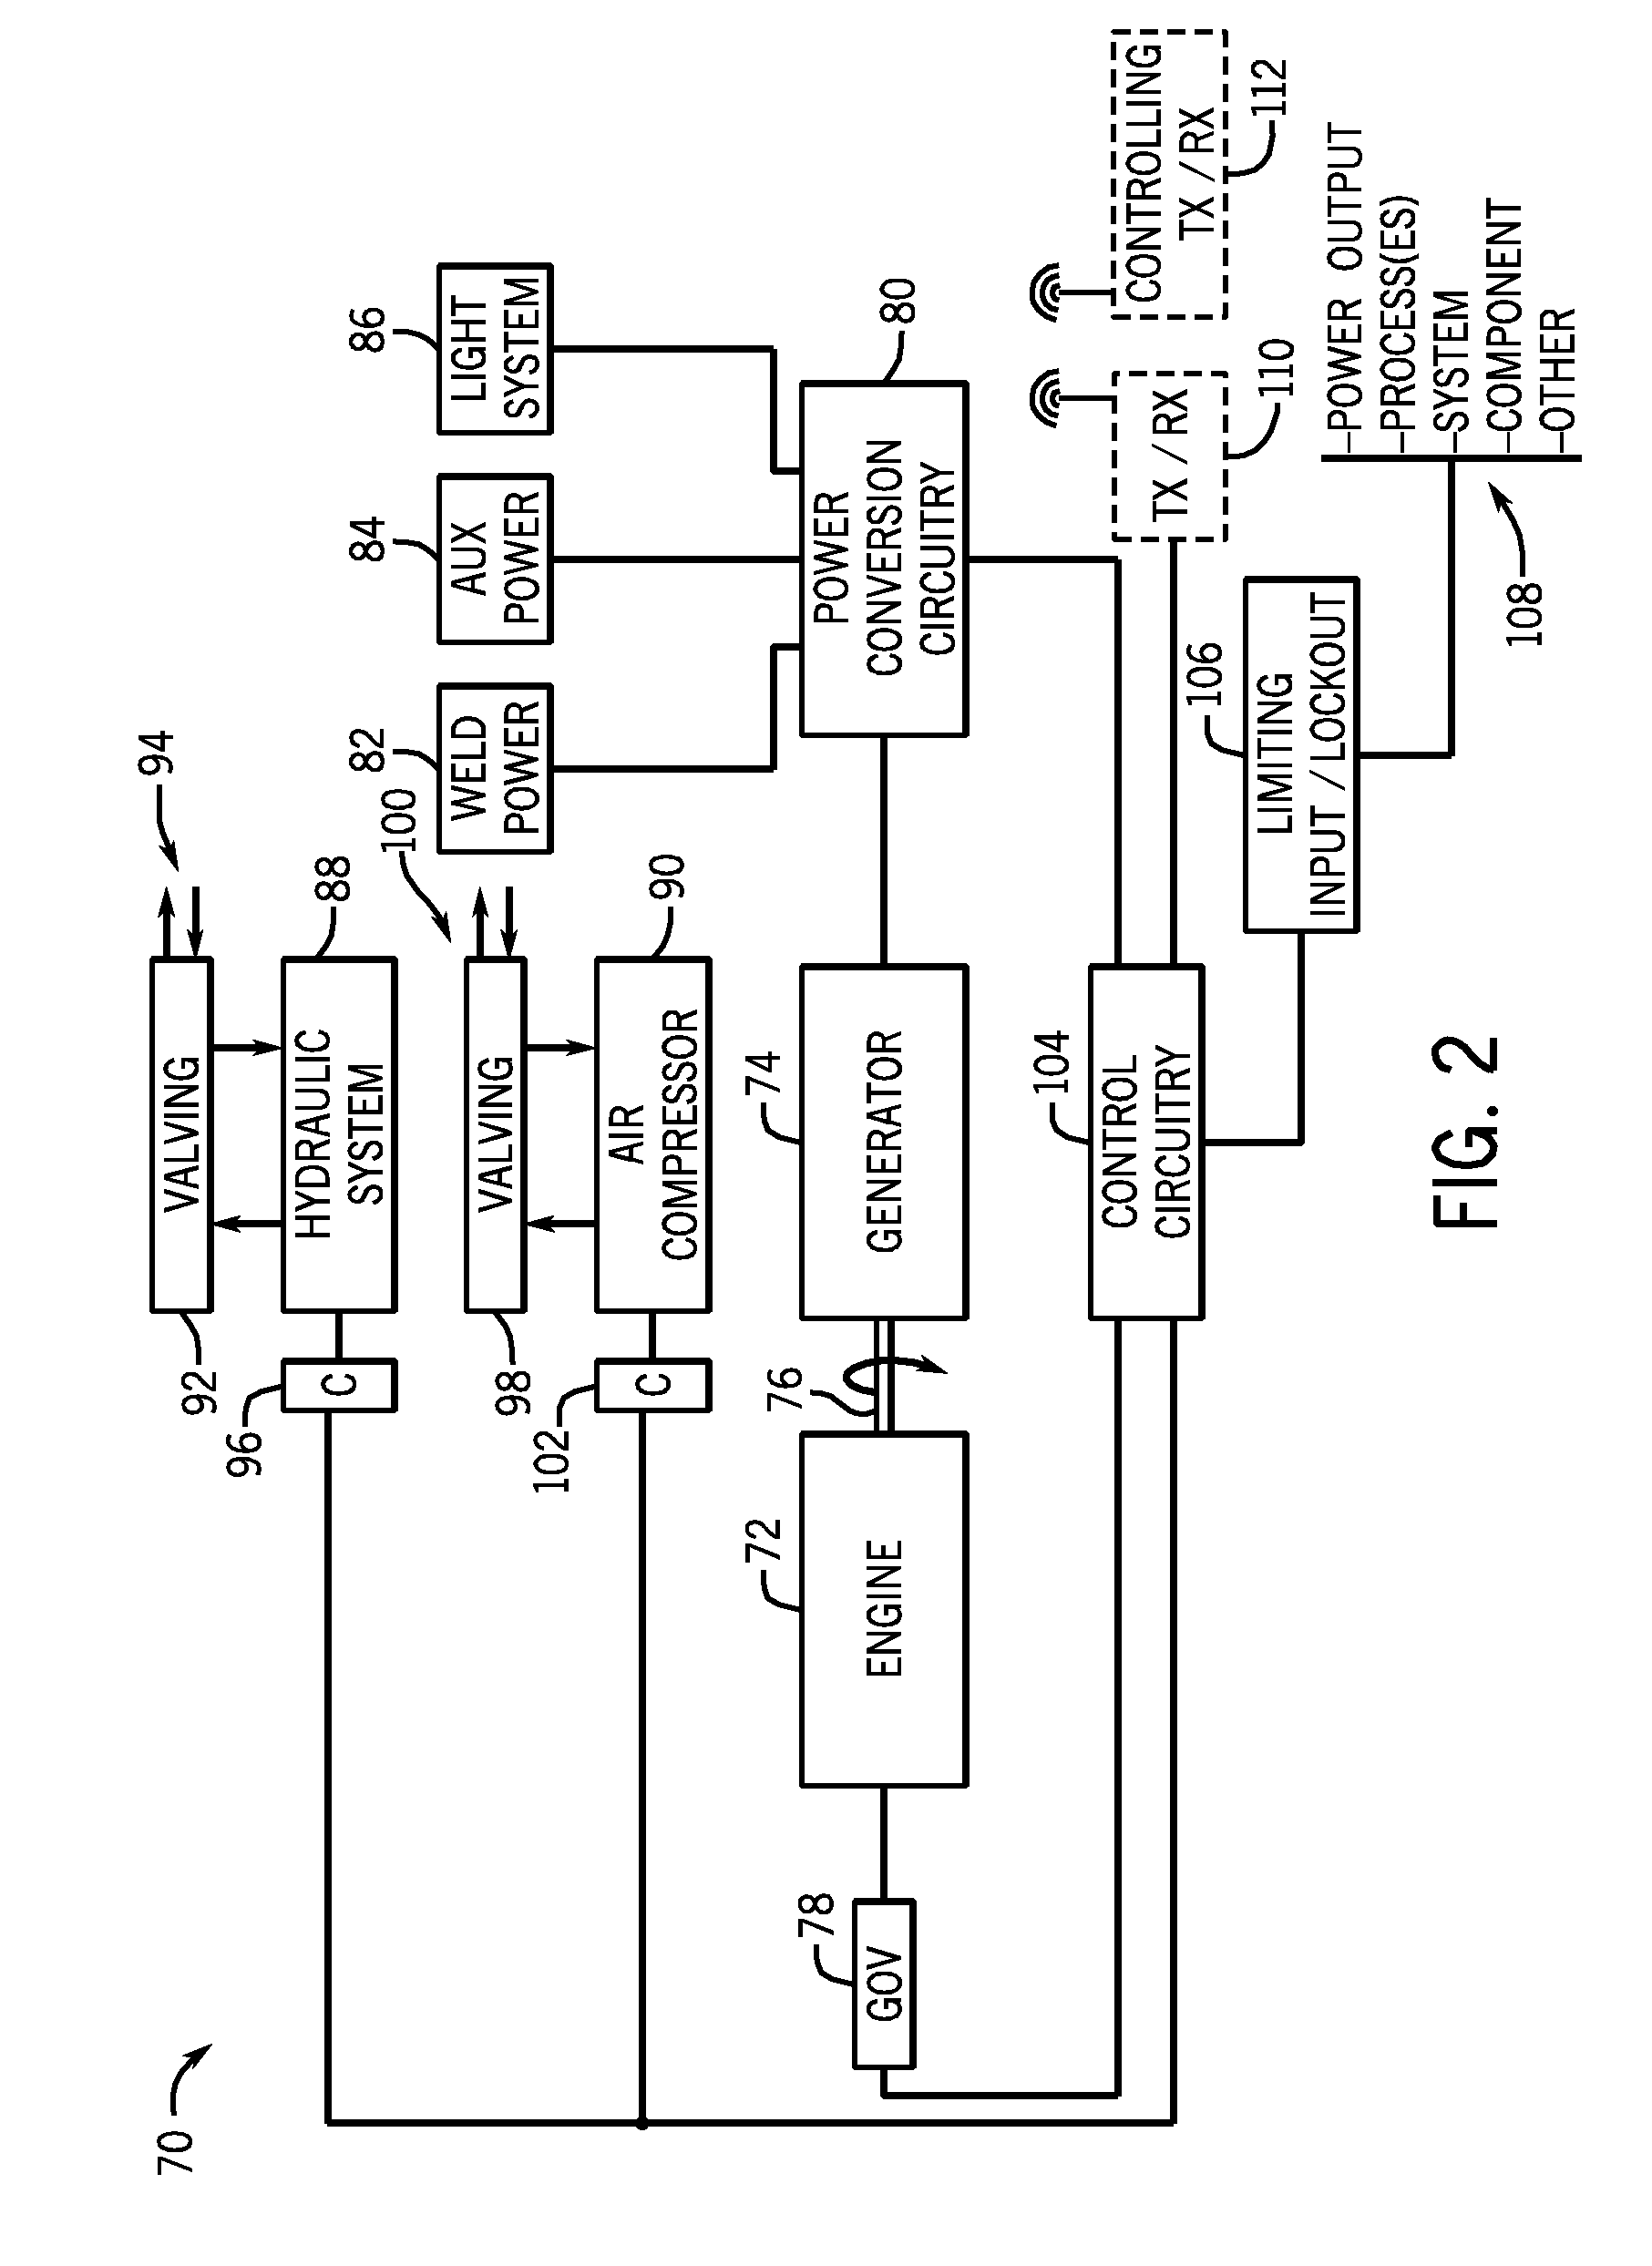 System and method for limiting welding output and ancillary features